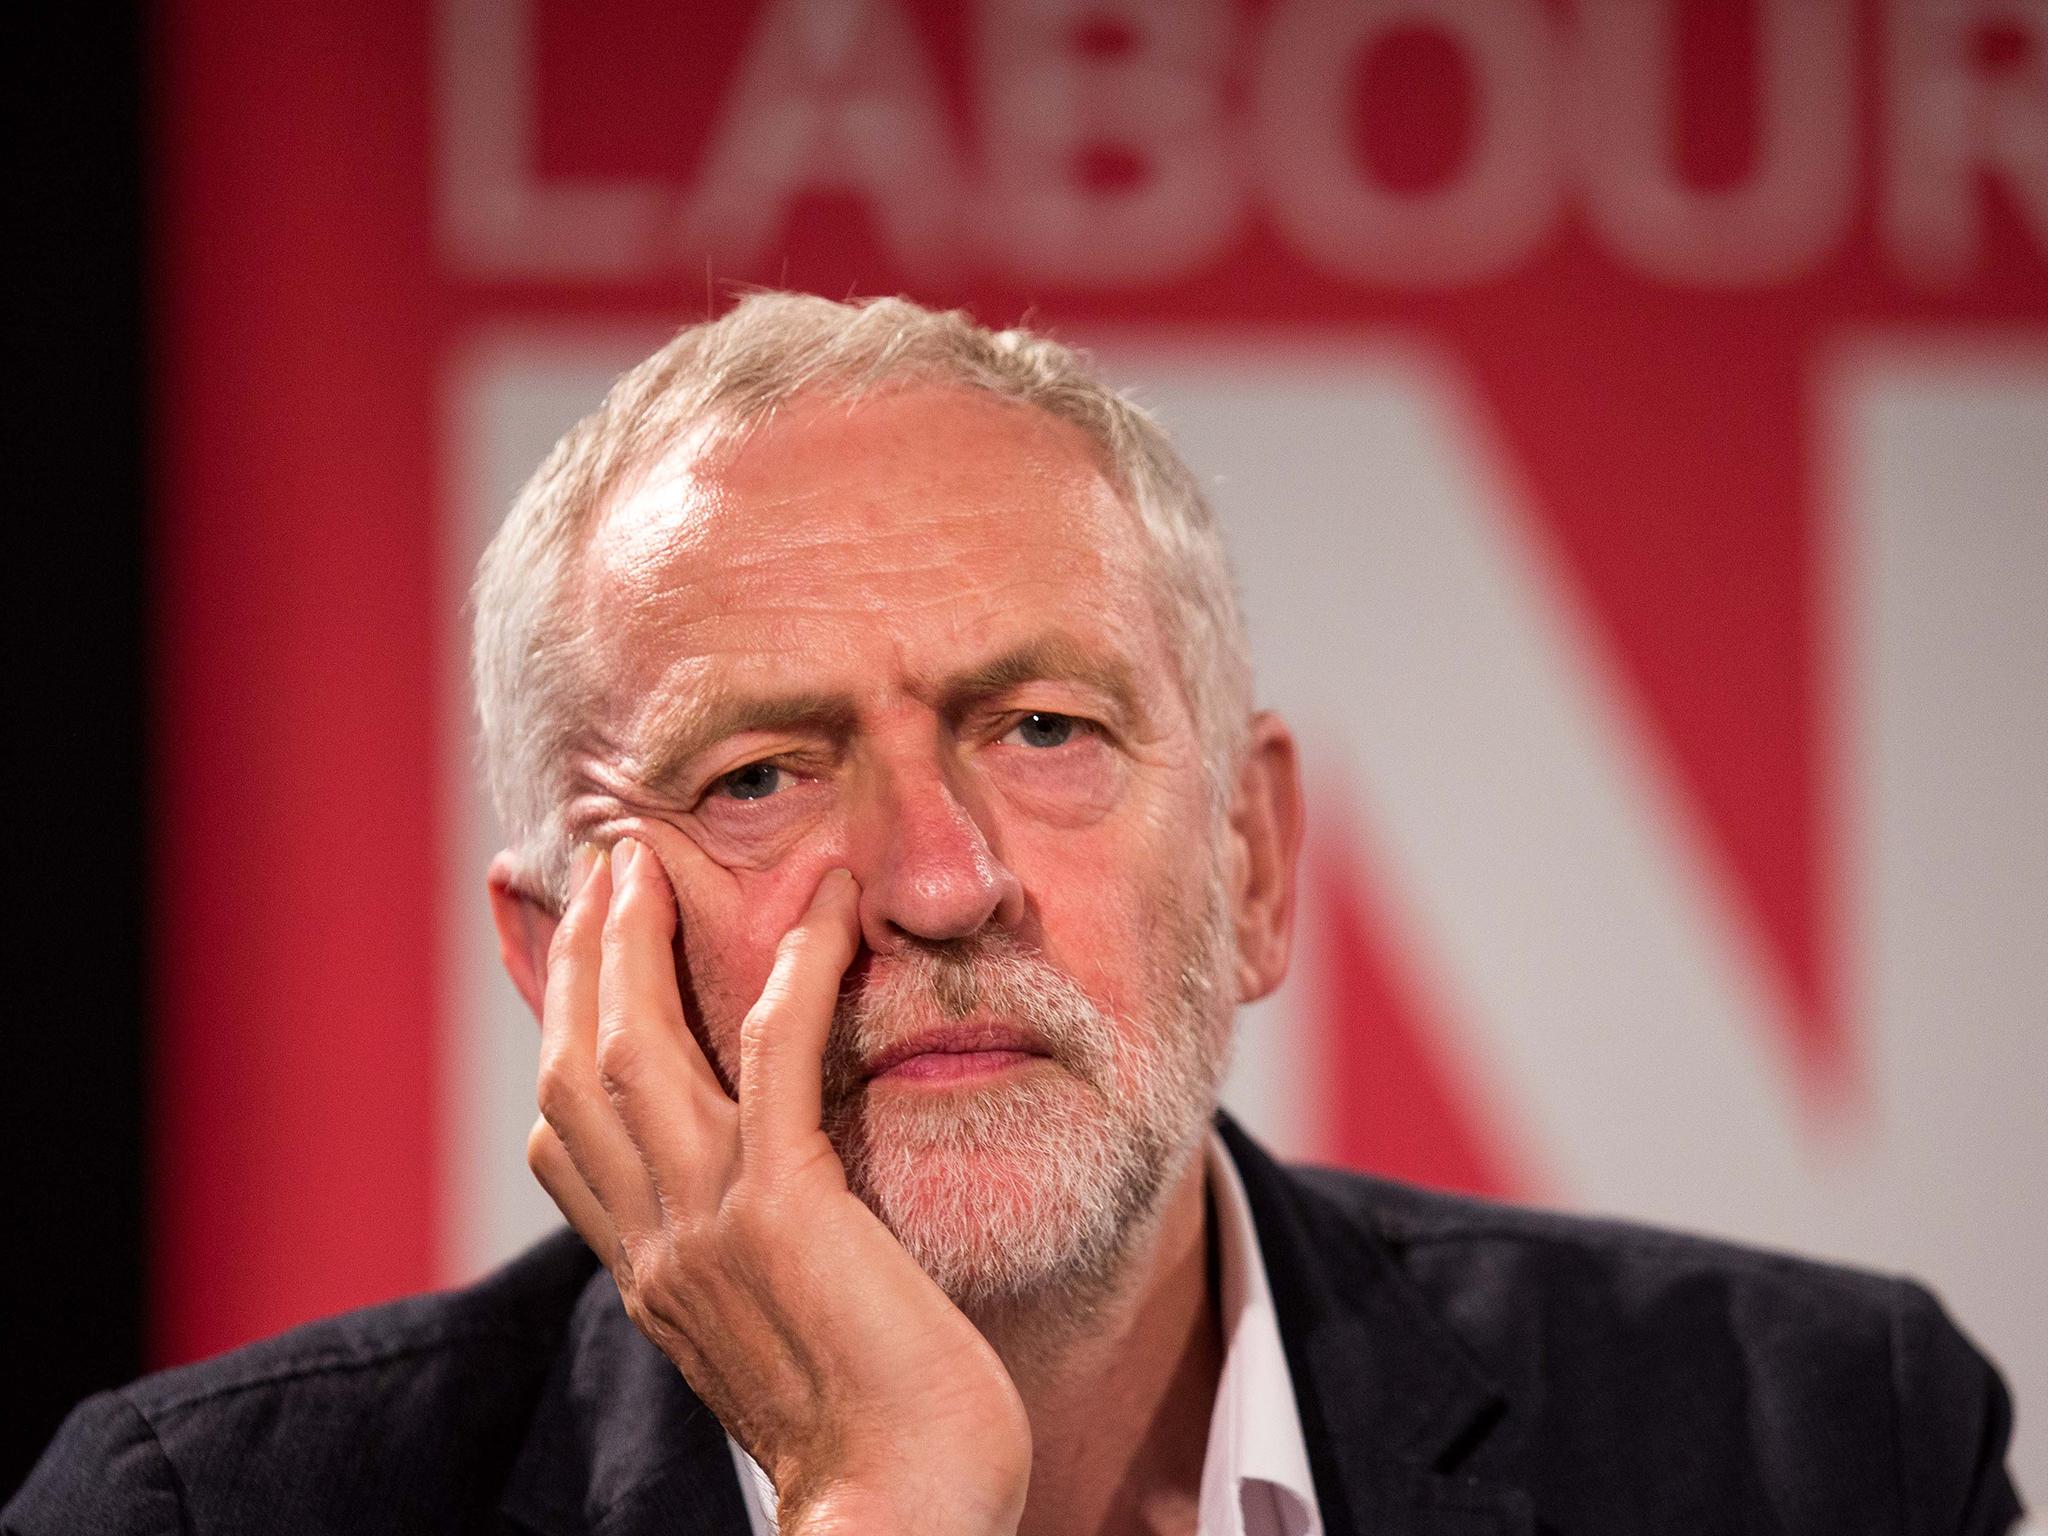 While the Government prepares for the negotiations that will define our future, Labour seeks sanctuary from its irrelevance within its tragicomic internal affairs